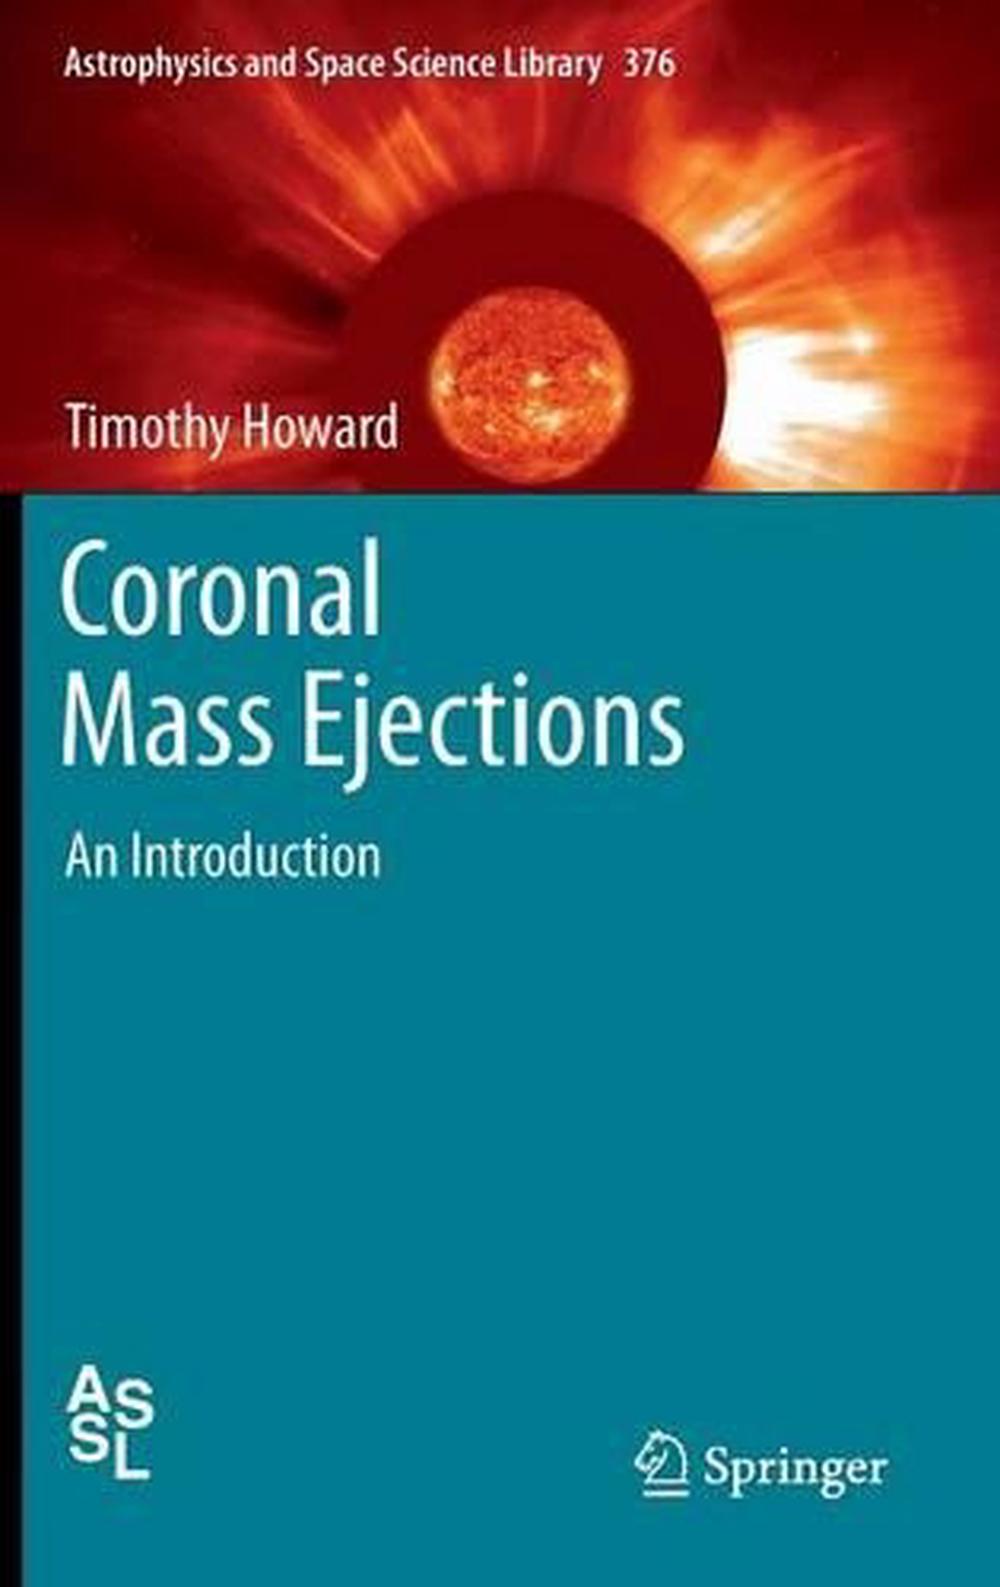 Coronal Mass Ejections An Introduction by Tim Howard (English) Hardcover Book F 9781441987884